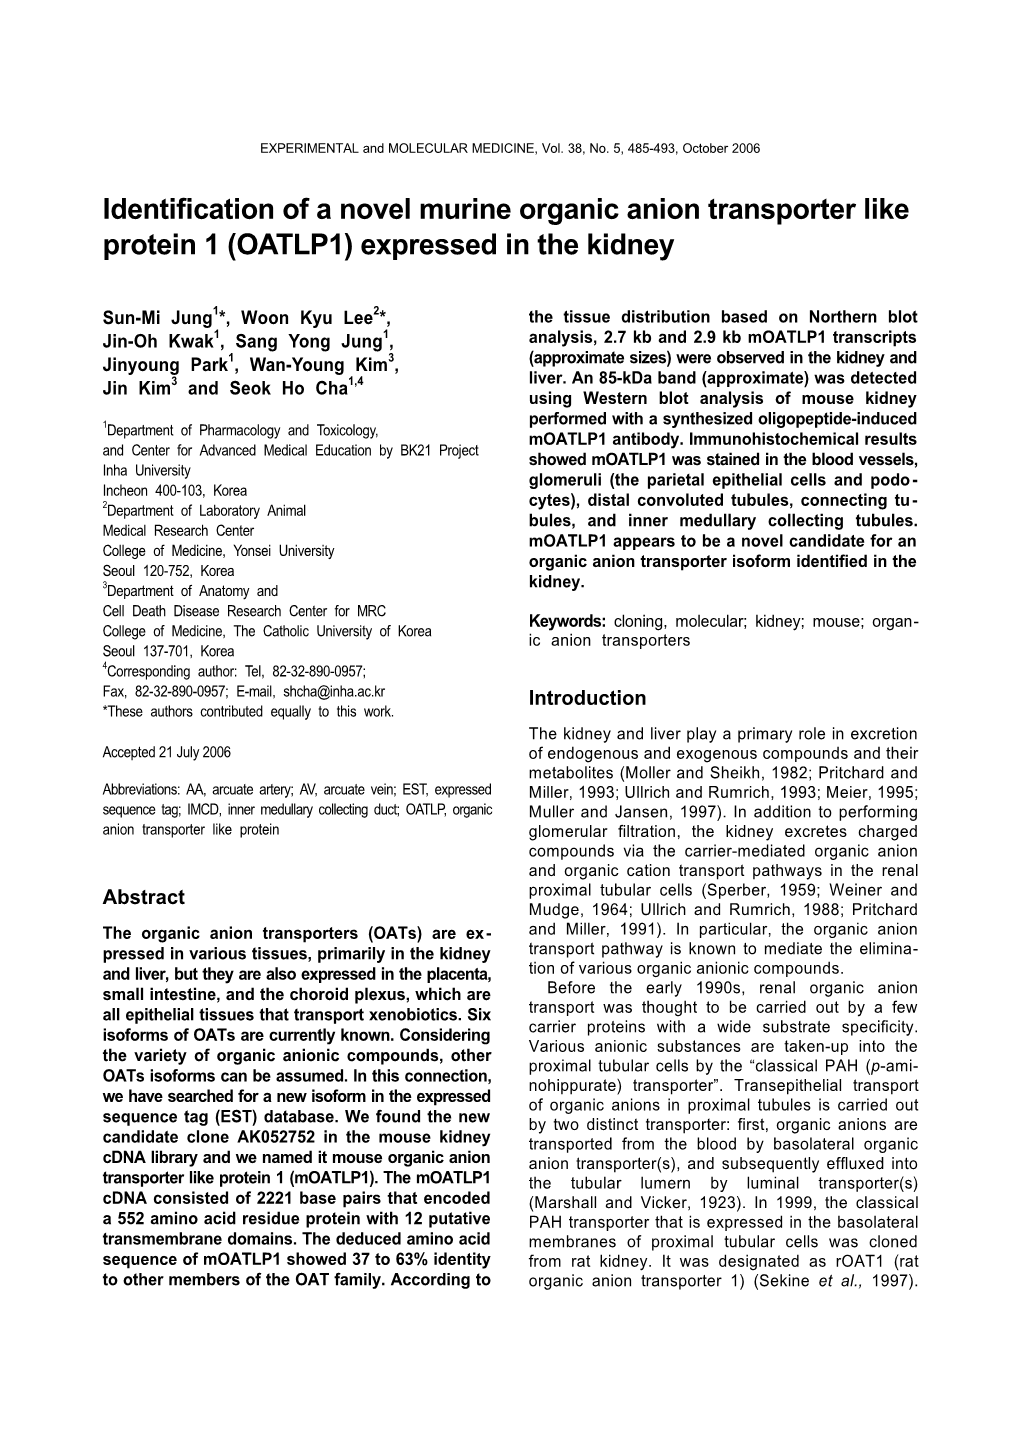 Identification of a Novel Murine Organic Anion Transporter Like Protein 1 (OATLP1) Expressed in the Kidney